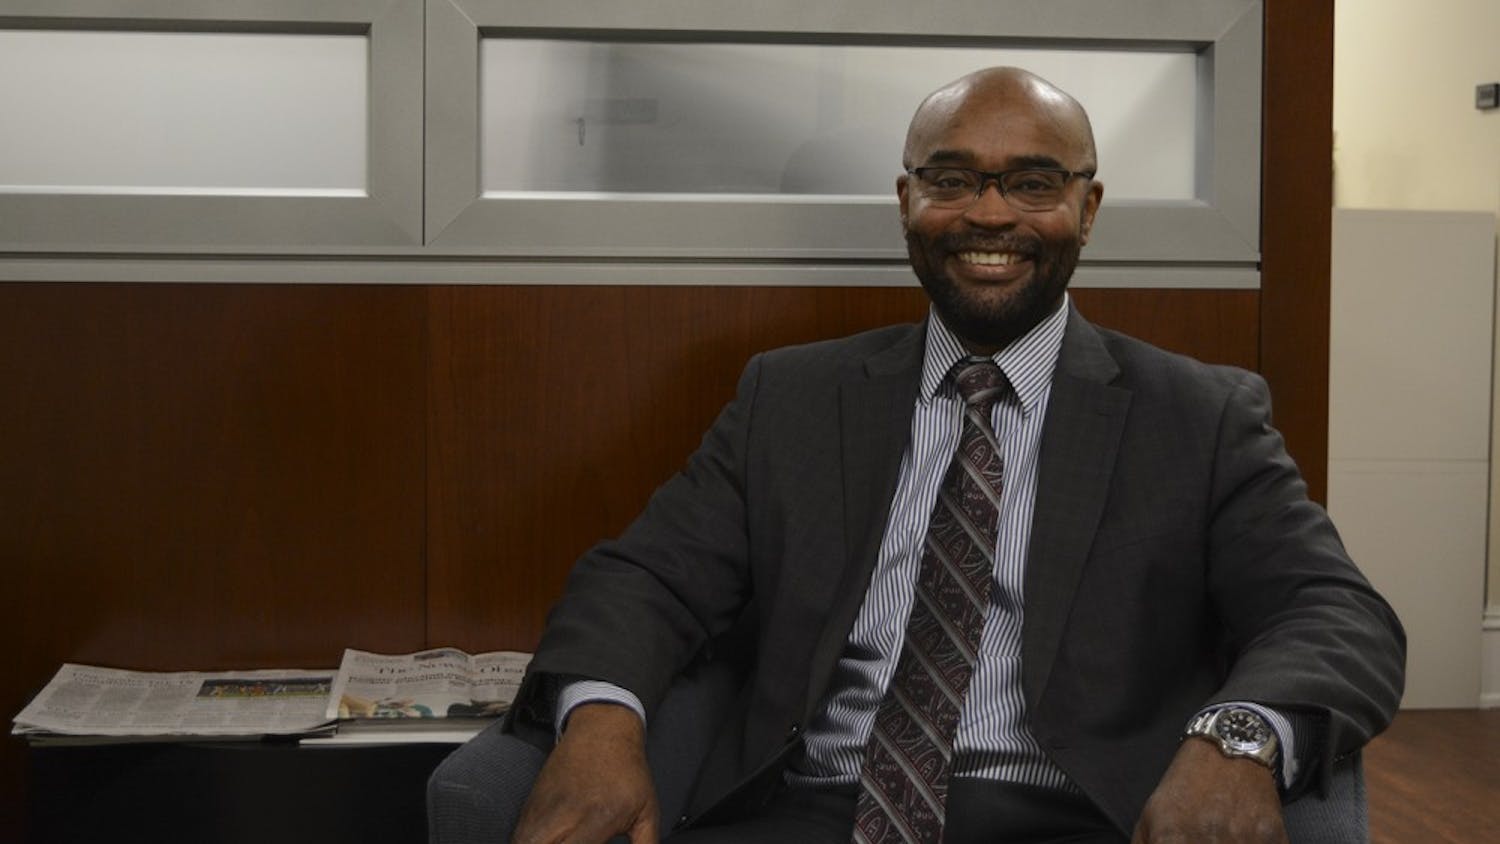 Dwayne Pinkney was just chosen as the new Senior Associate Vice Chancellor of Finance and Administration. 